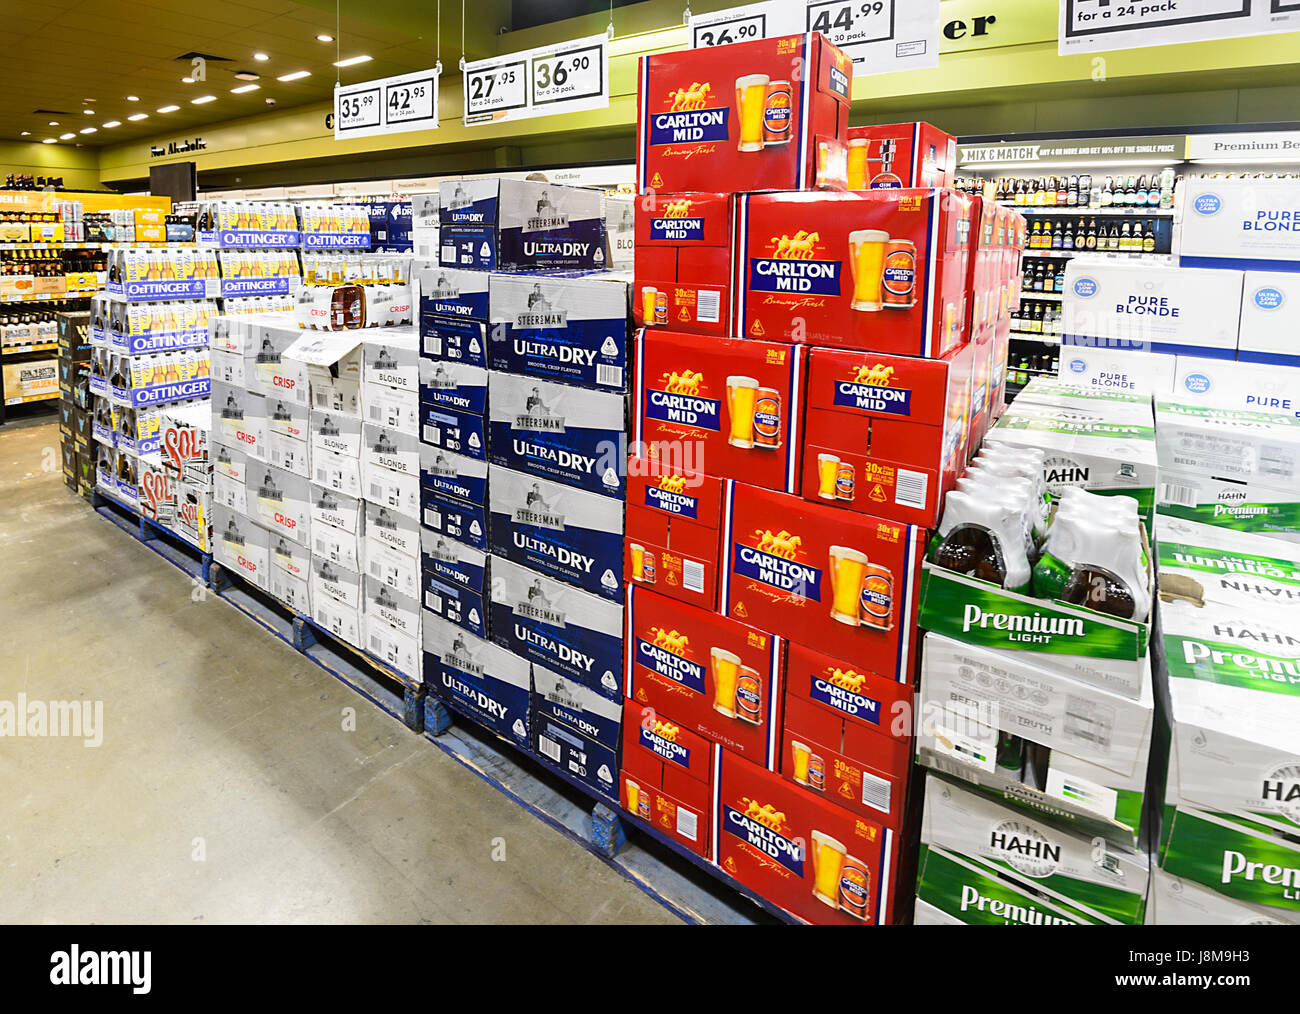 Cartons of beer on display at Dan Murphy's Liquor Store, Shellharbour, New South Wales, NSW, Australia Stock Photo